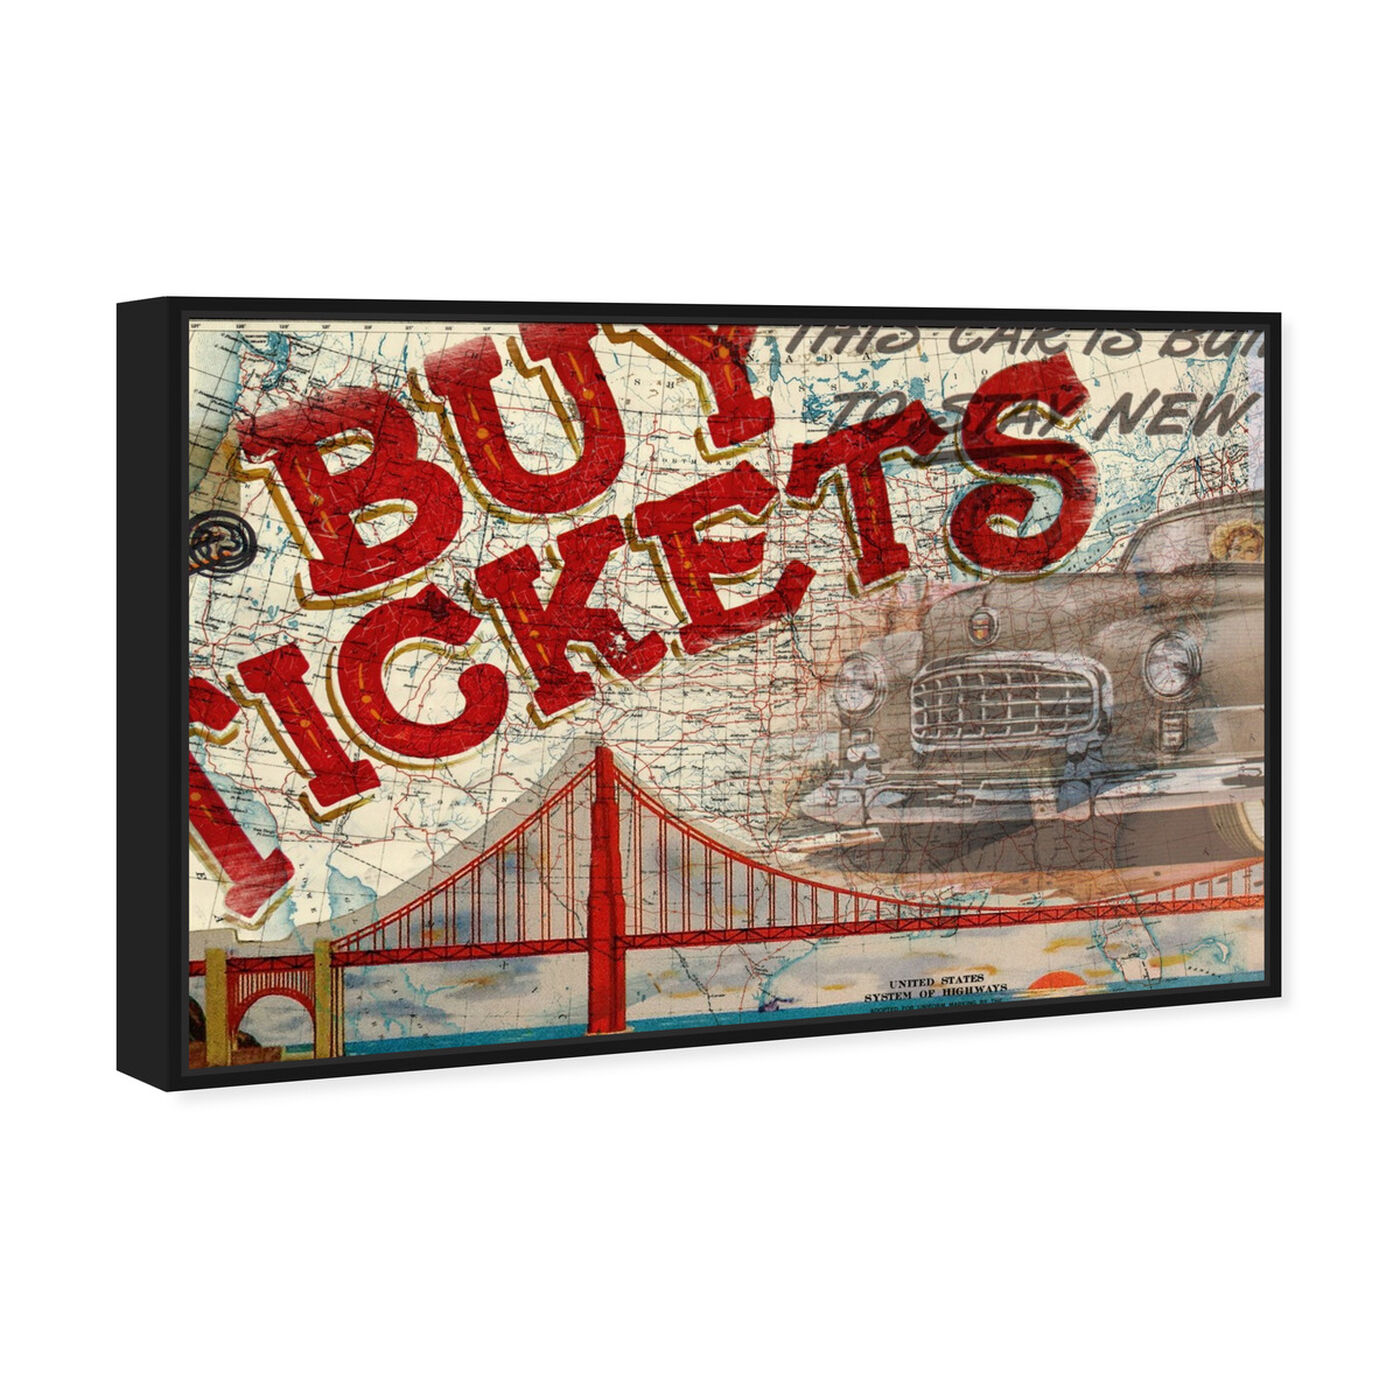 Angled view of Buy Tickets featuring advertising and posters art.